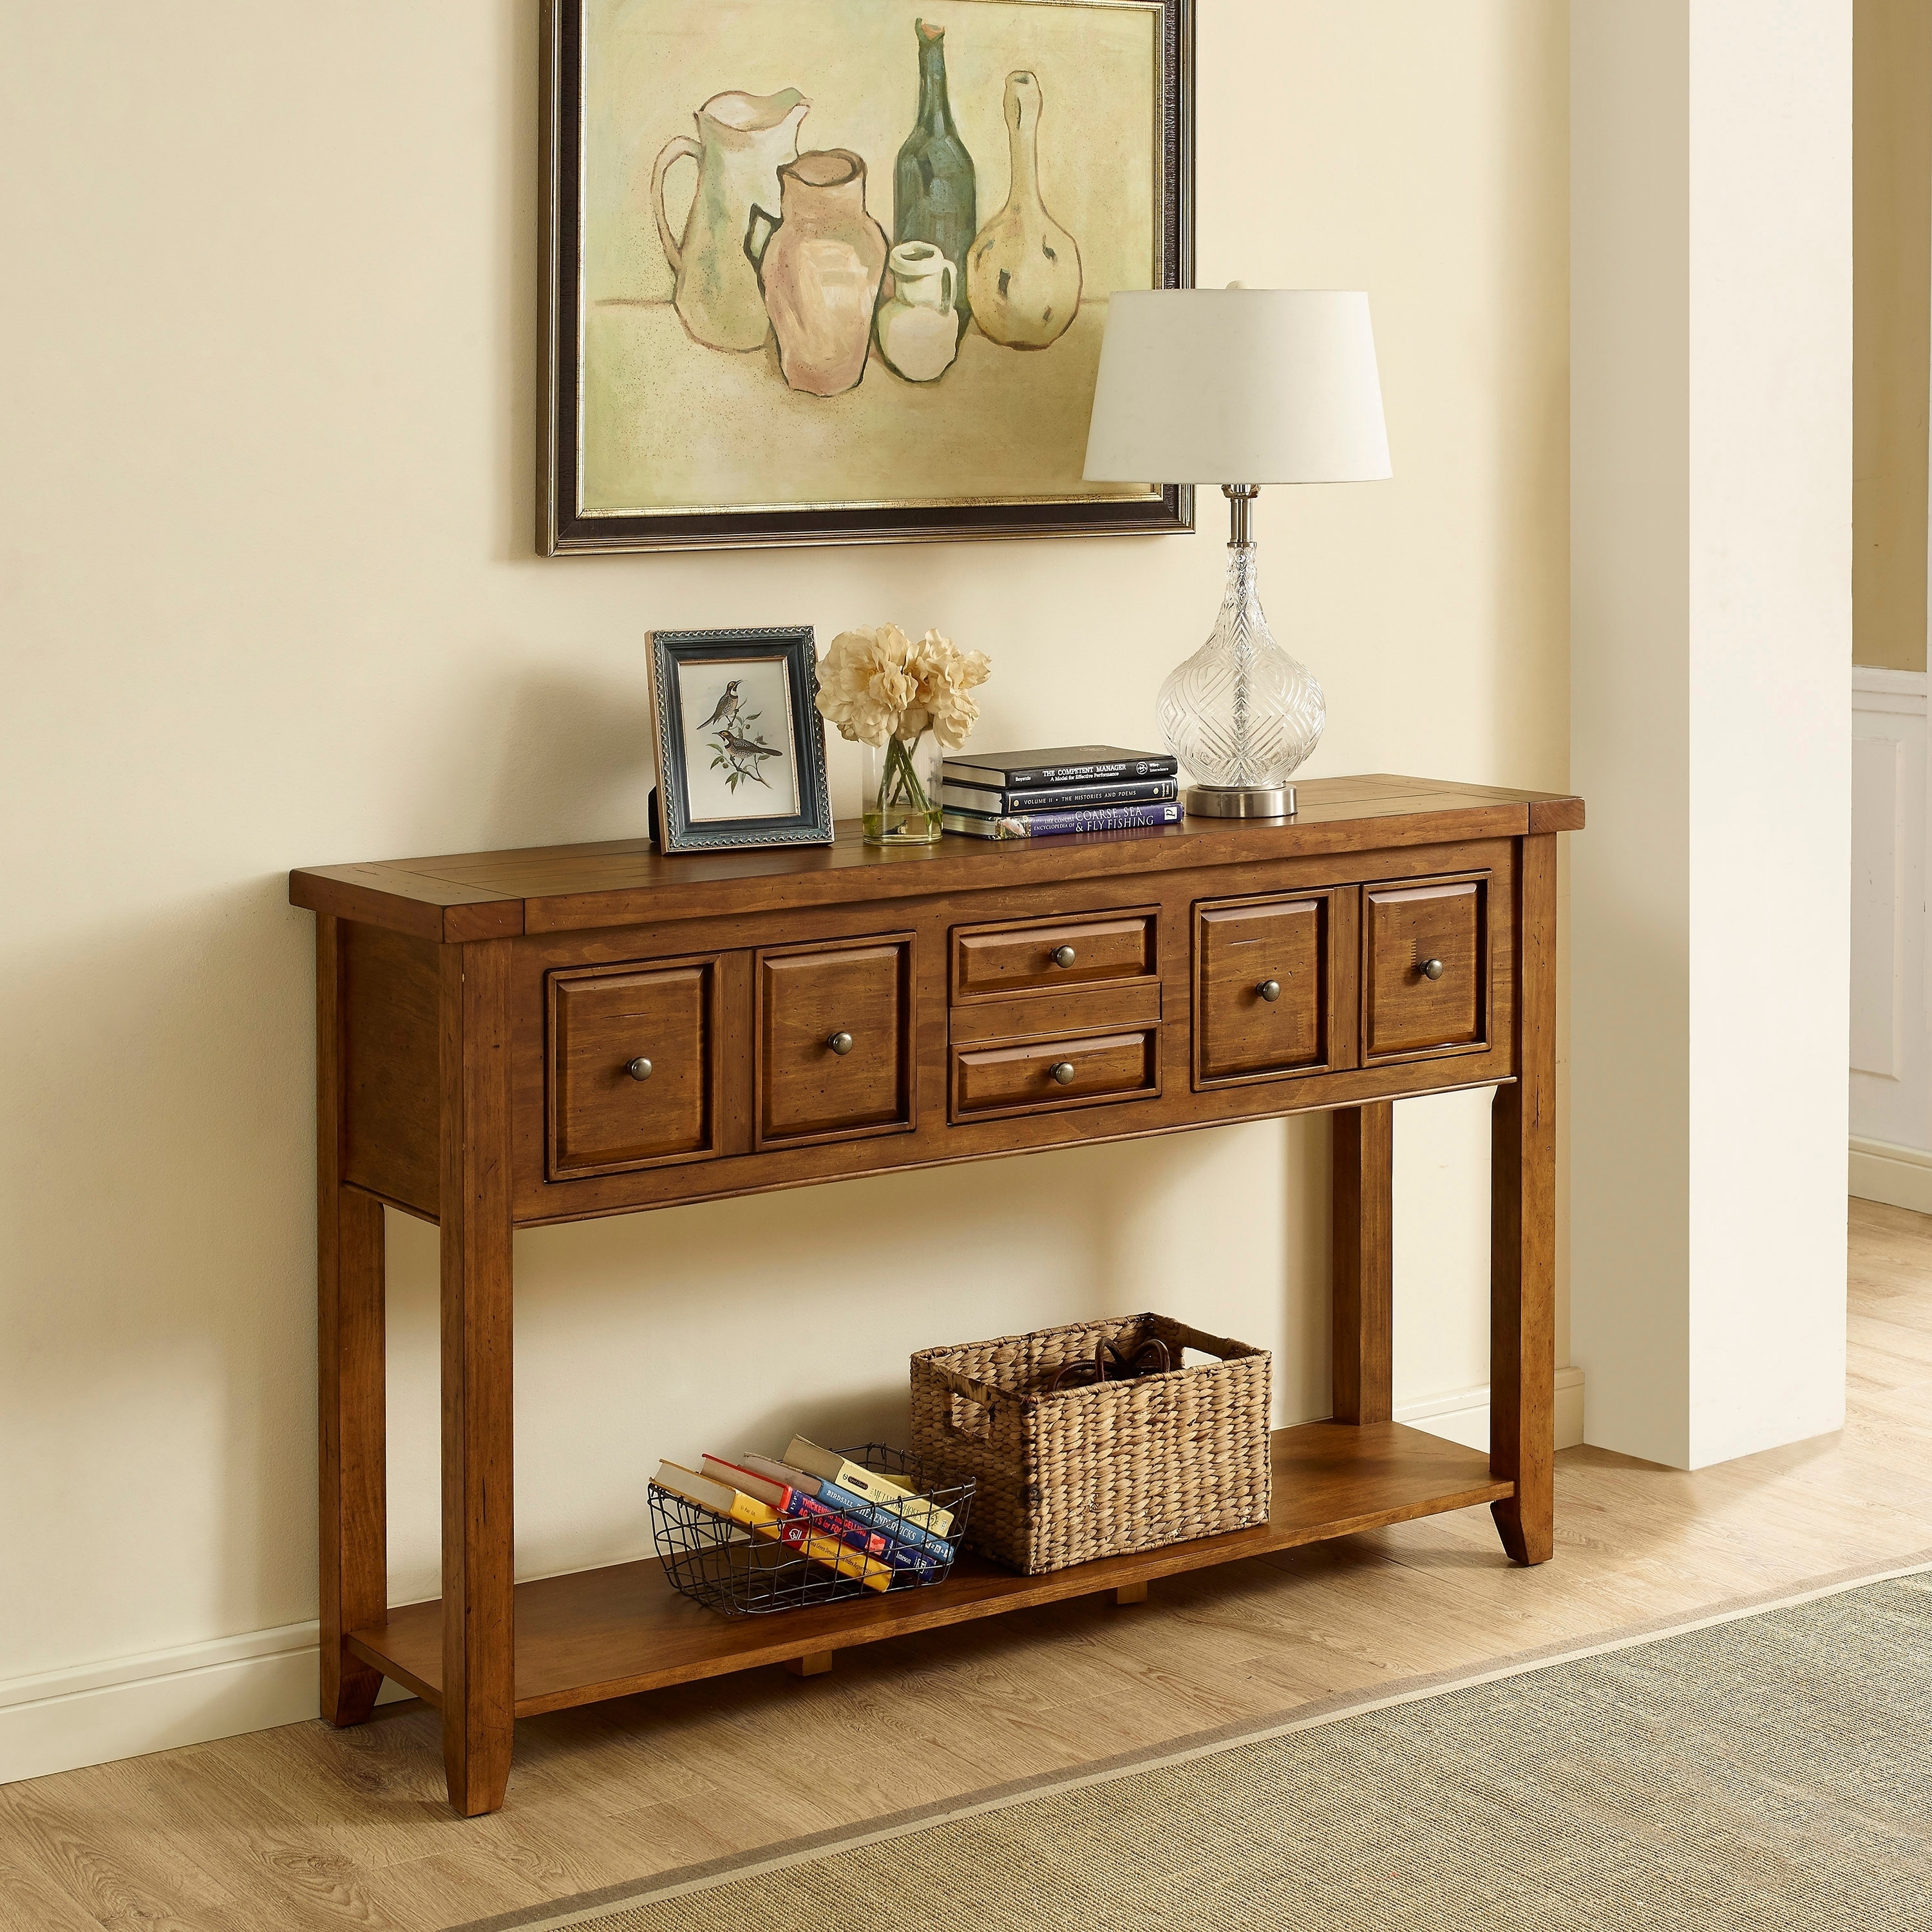 Shop Sienna Oak Finish Moroccan Pine Entryway Table Overstock